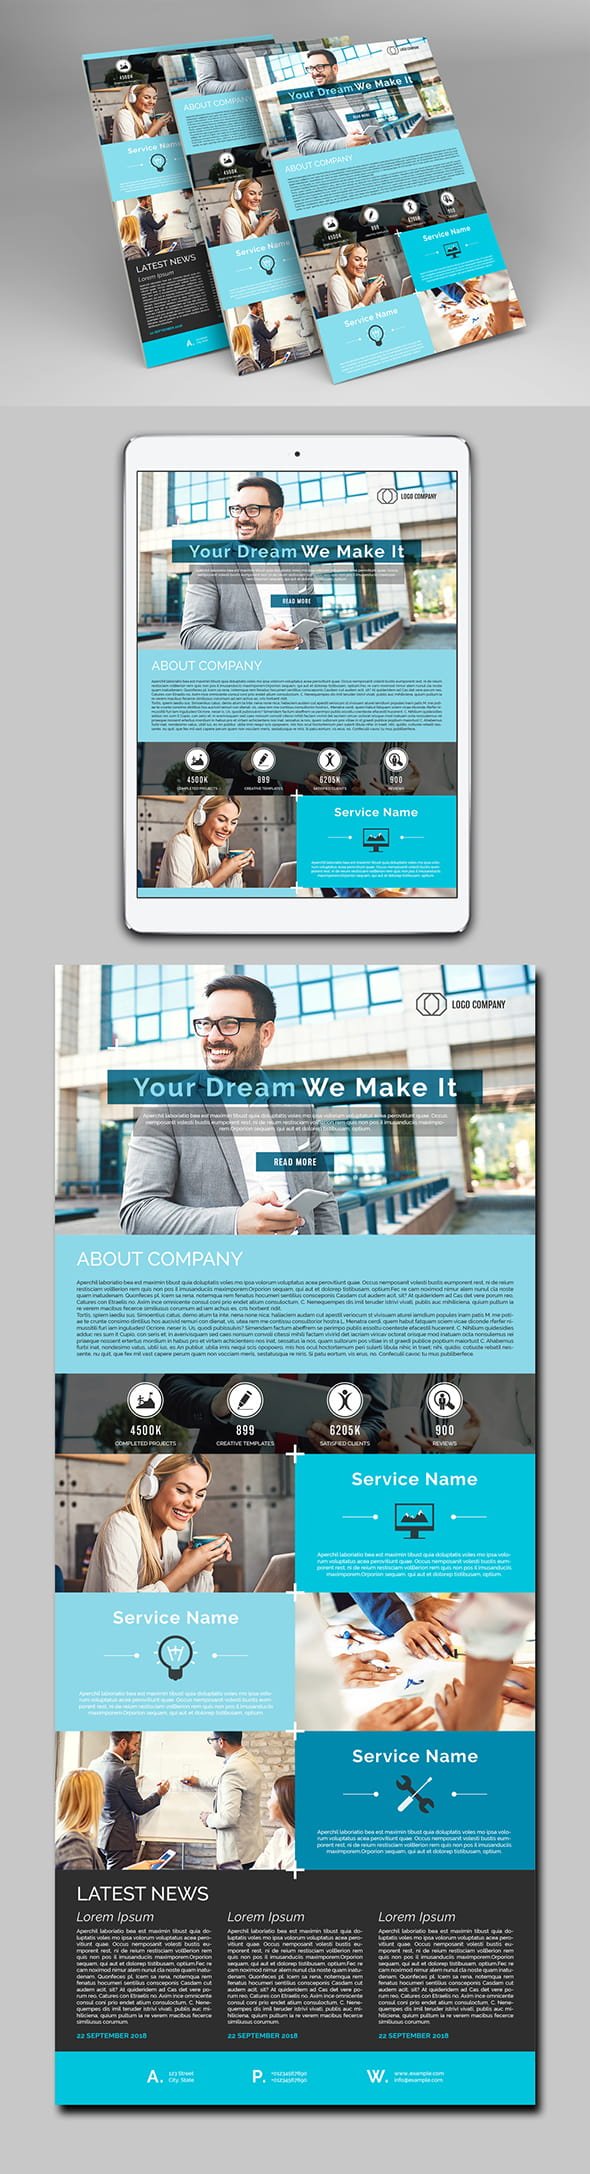 AdobeStock - Web Newsletter Layout with Blue Accents - 221035023